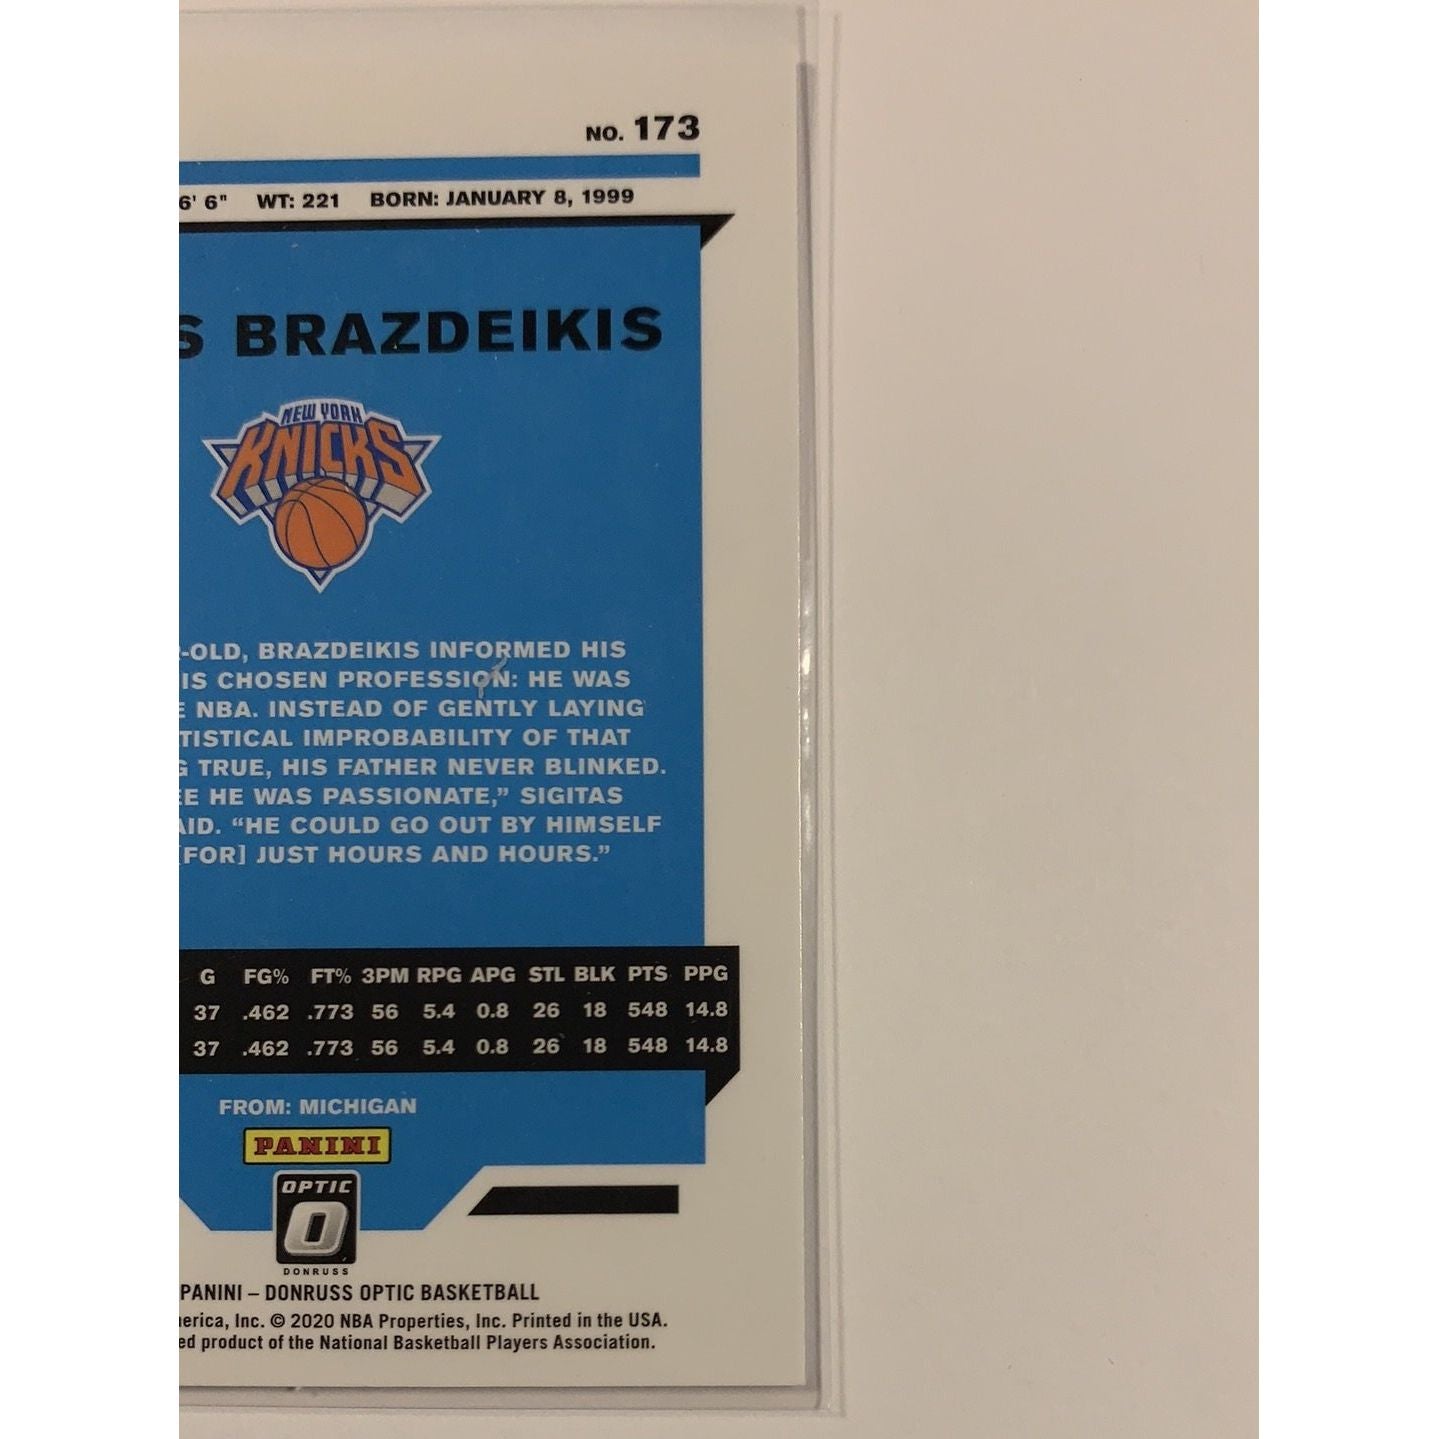  2019-20 Donruss Optic Ignas Brazdeikis Rated Rookie  Local Legends Cards & Collectibles